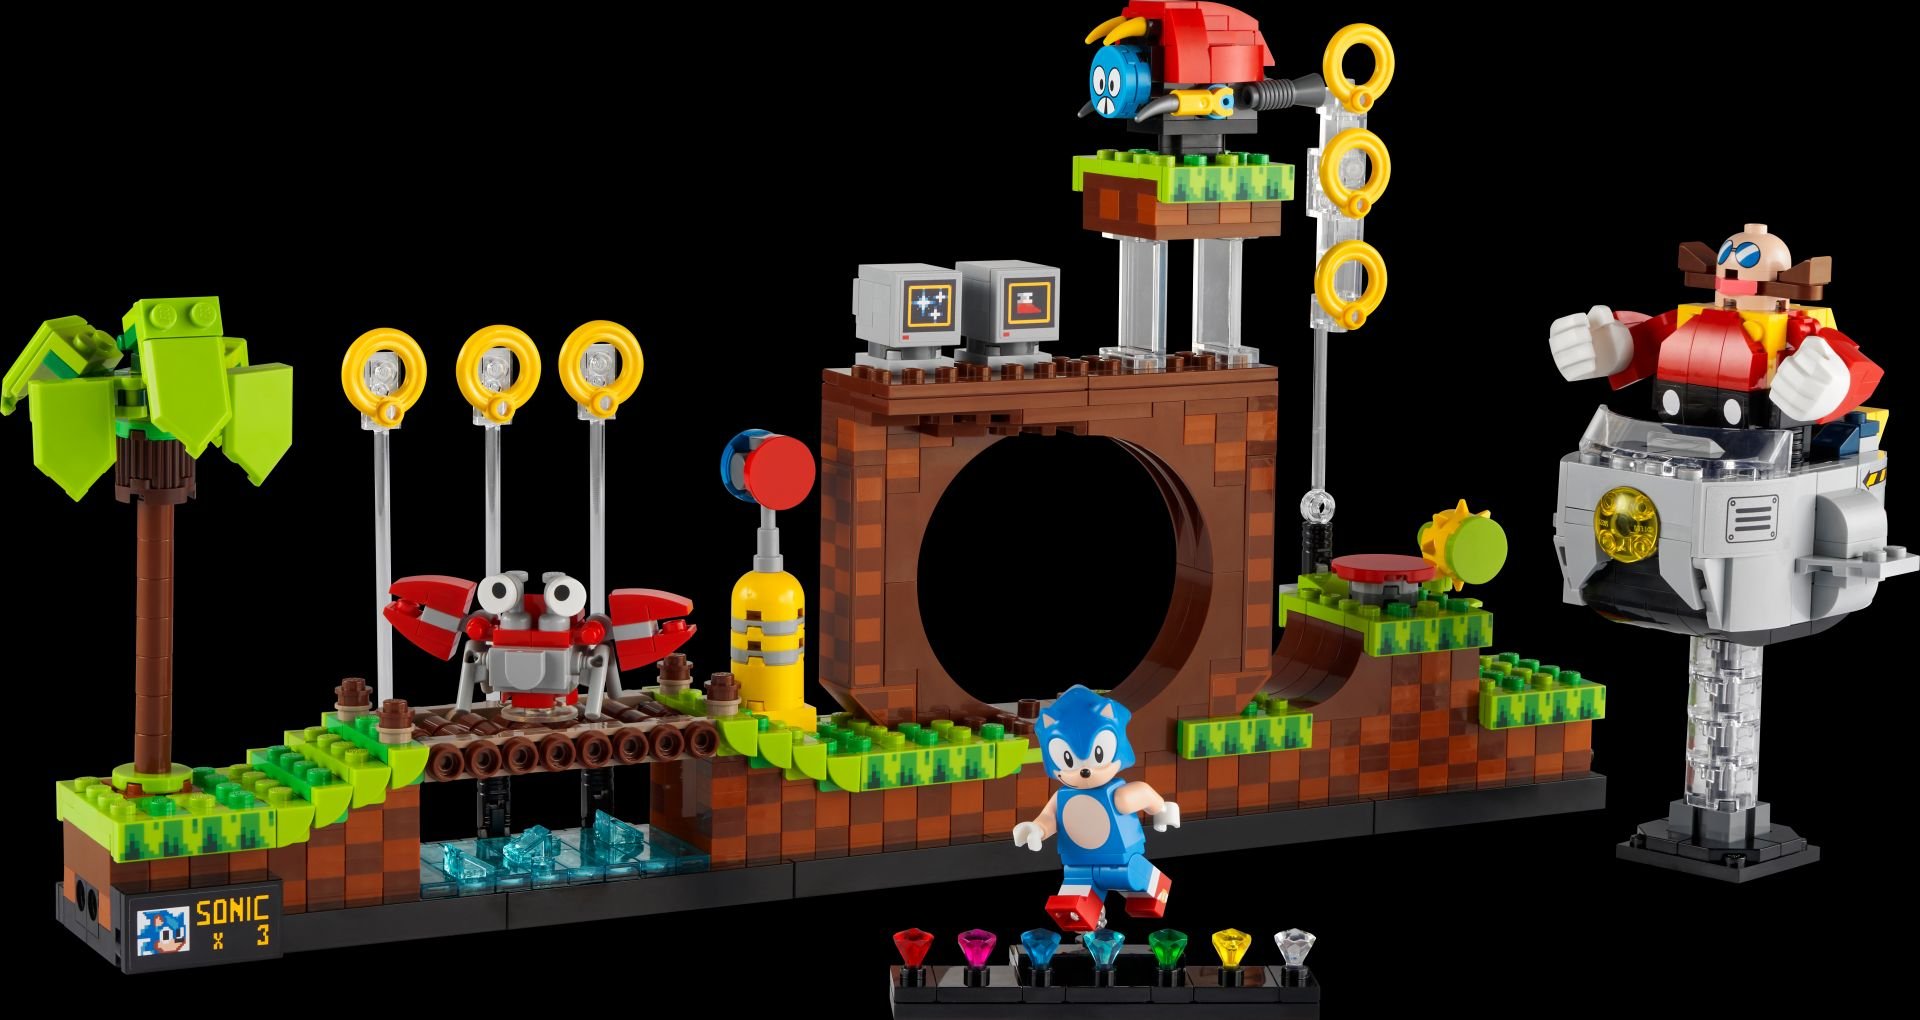 Ring In The New Year With Brand New SONIC THE HEDGEHOG LEGO Set